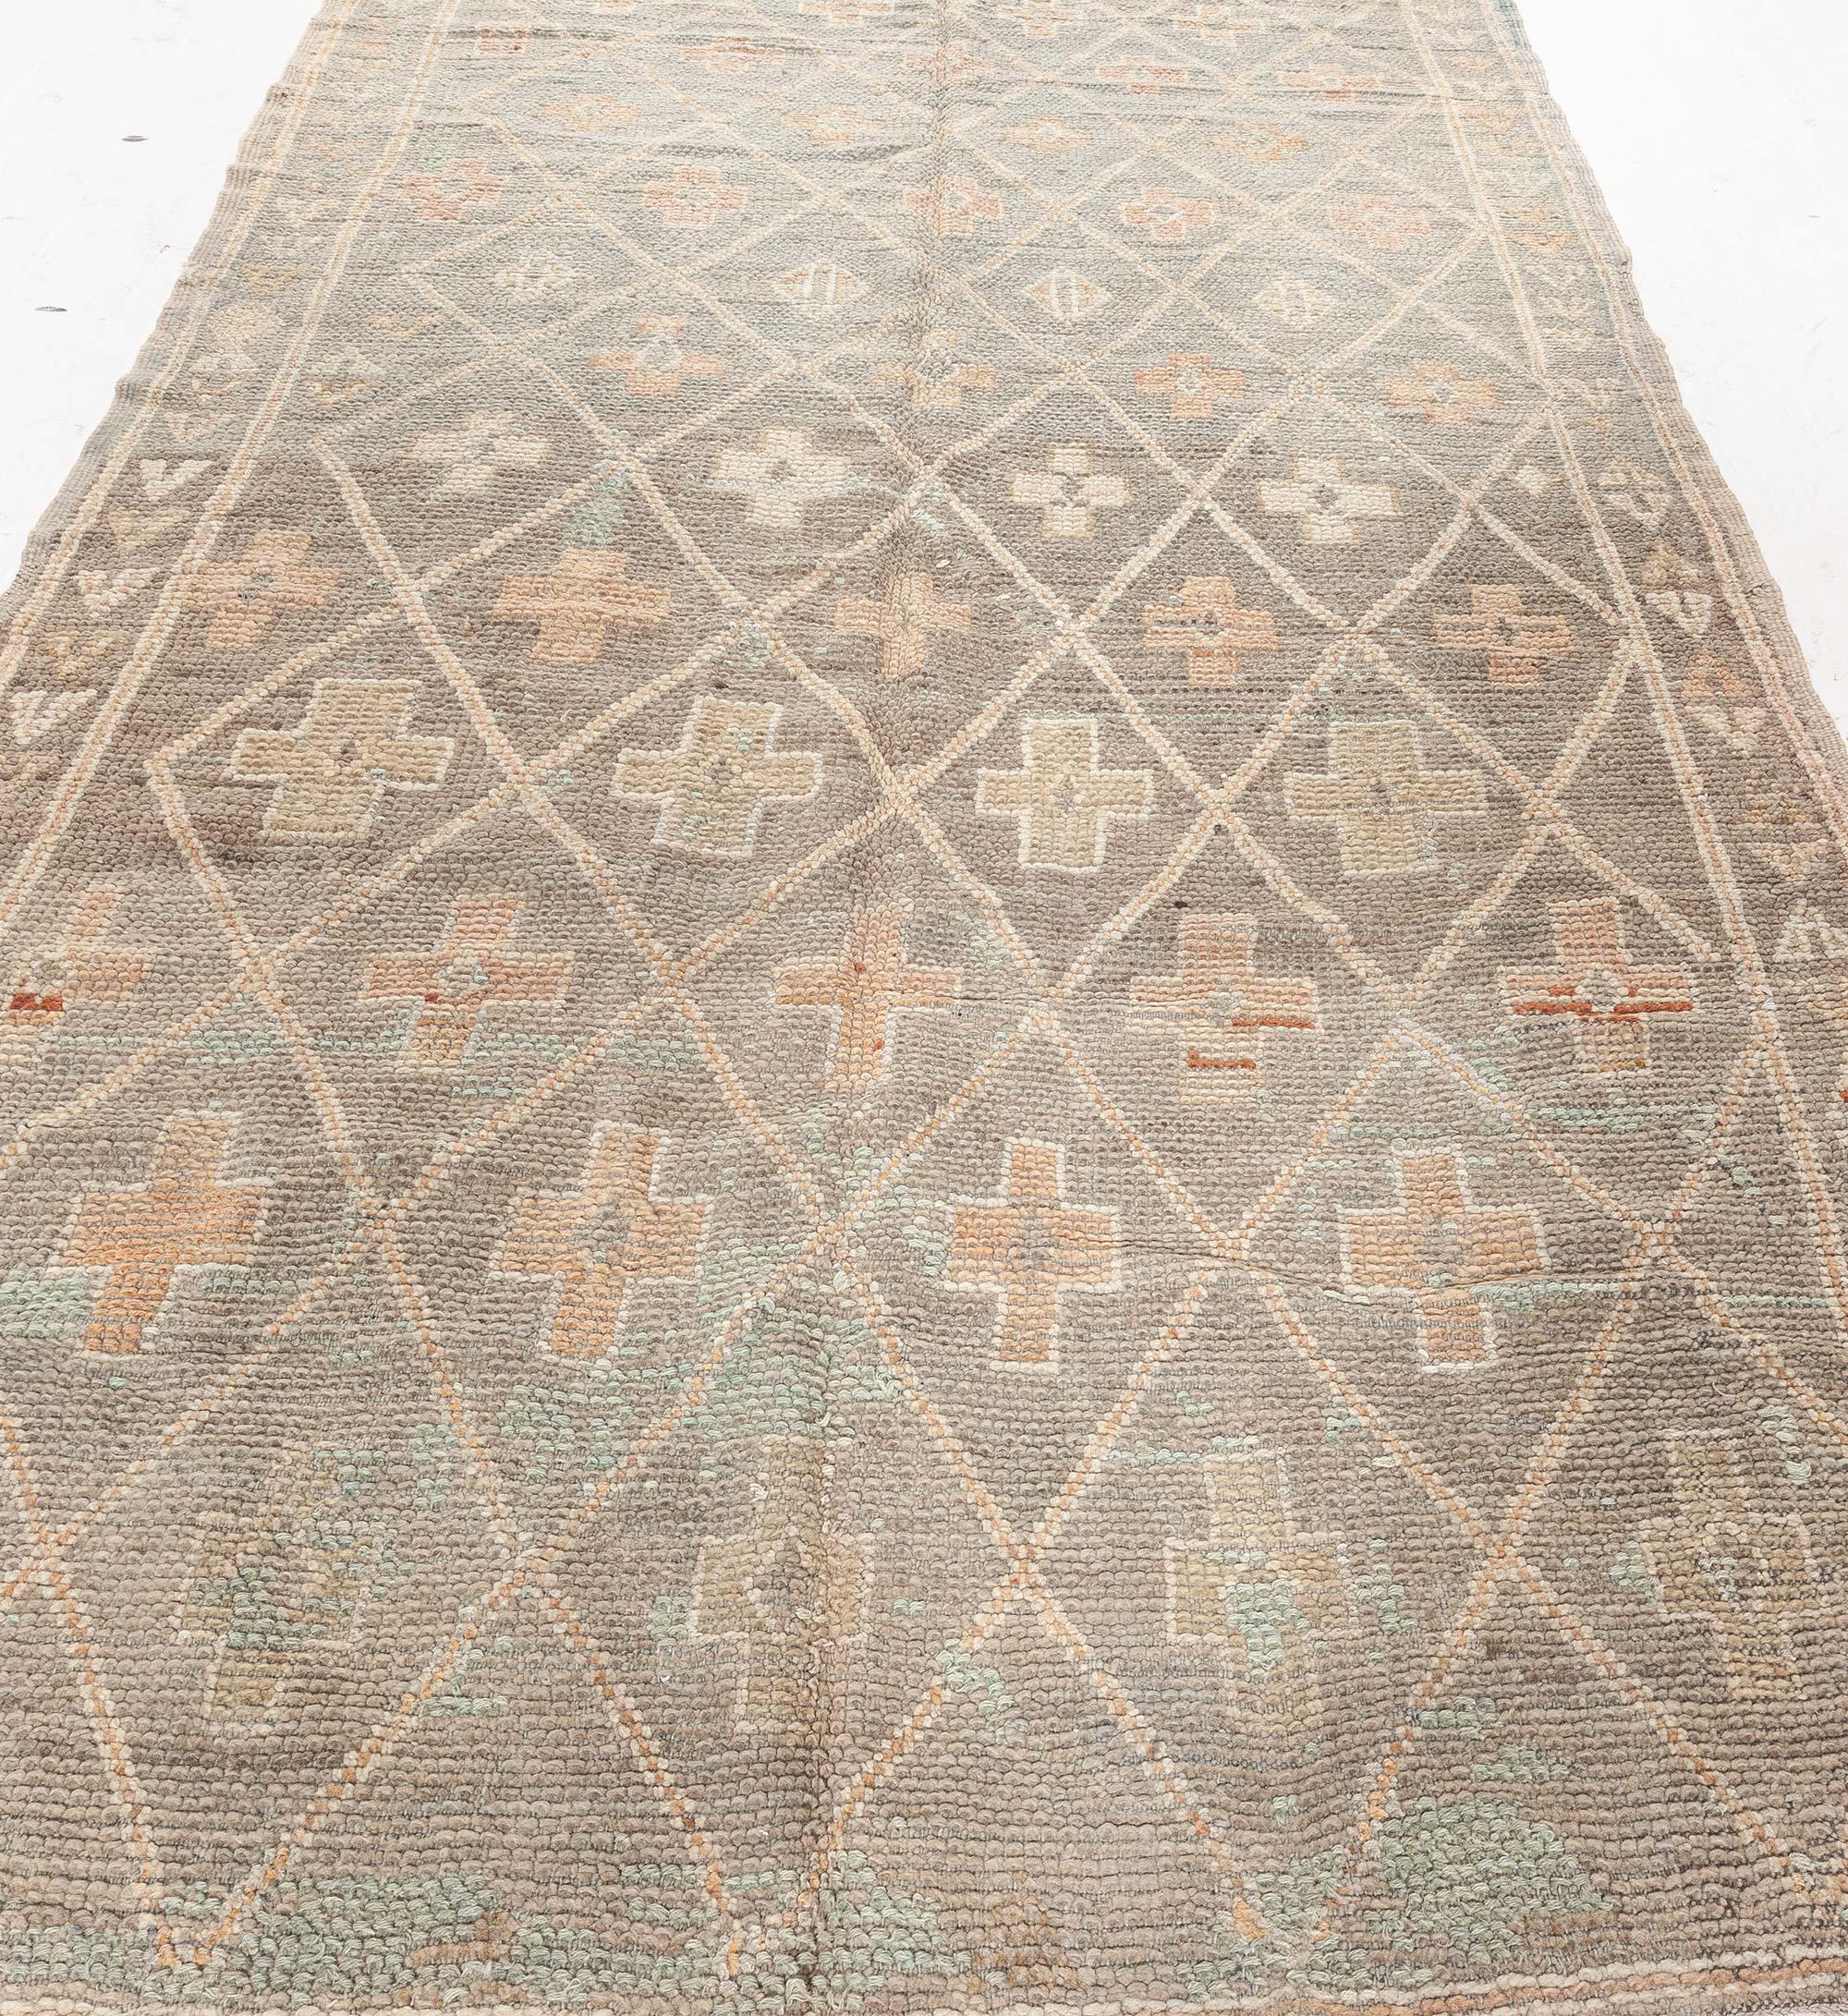 Vintage Tribal Moroccan Handmade Wool Rug In Good Condition For Sale In New York, NY